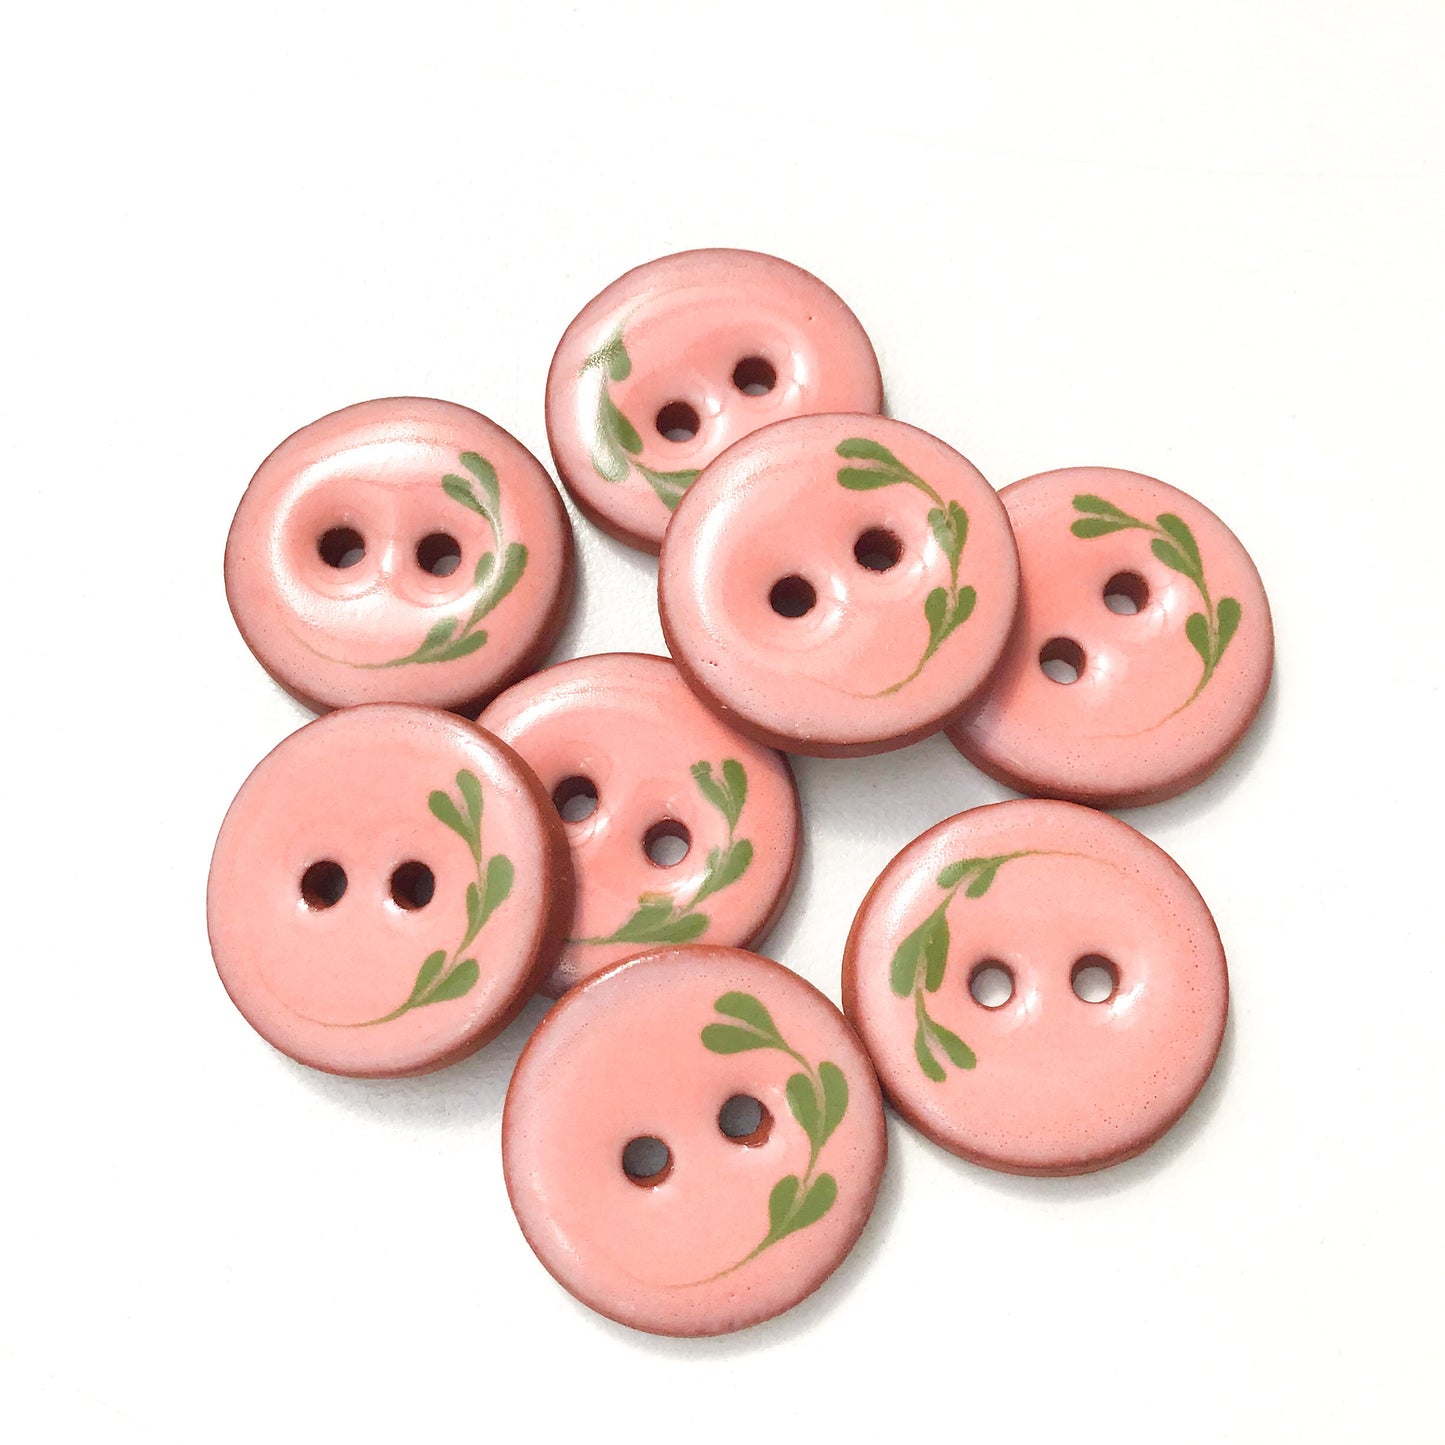 Salmon Pink Ceramic Leaflet Buttons - Round Ceramic Buttons - 3/4" - 8 Pack